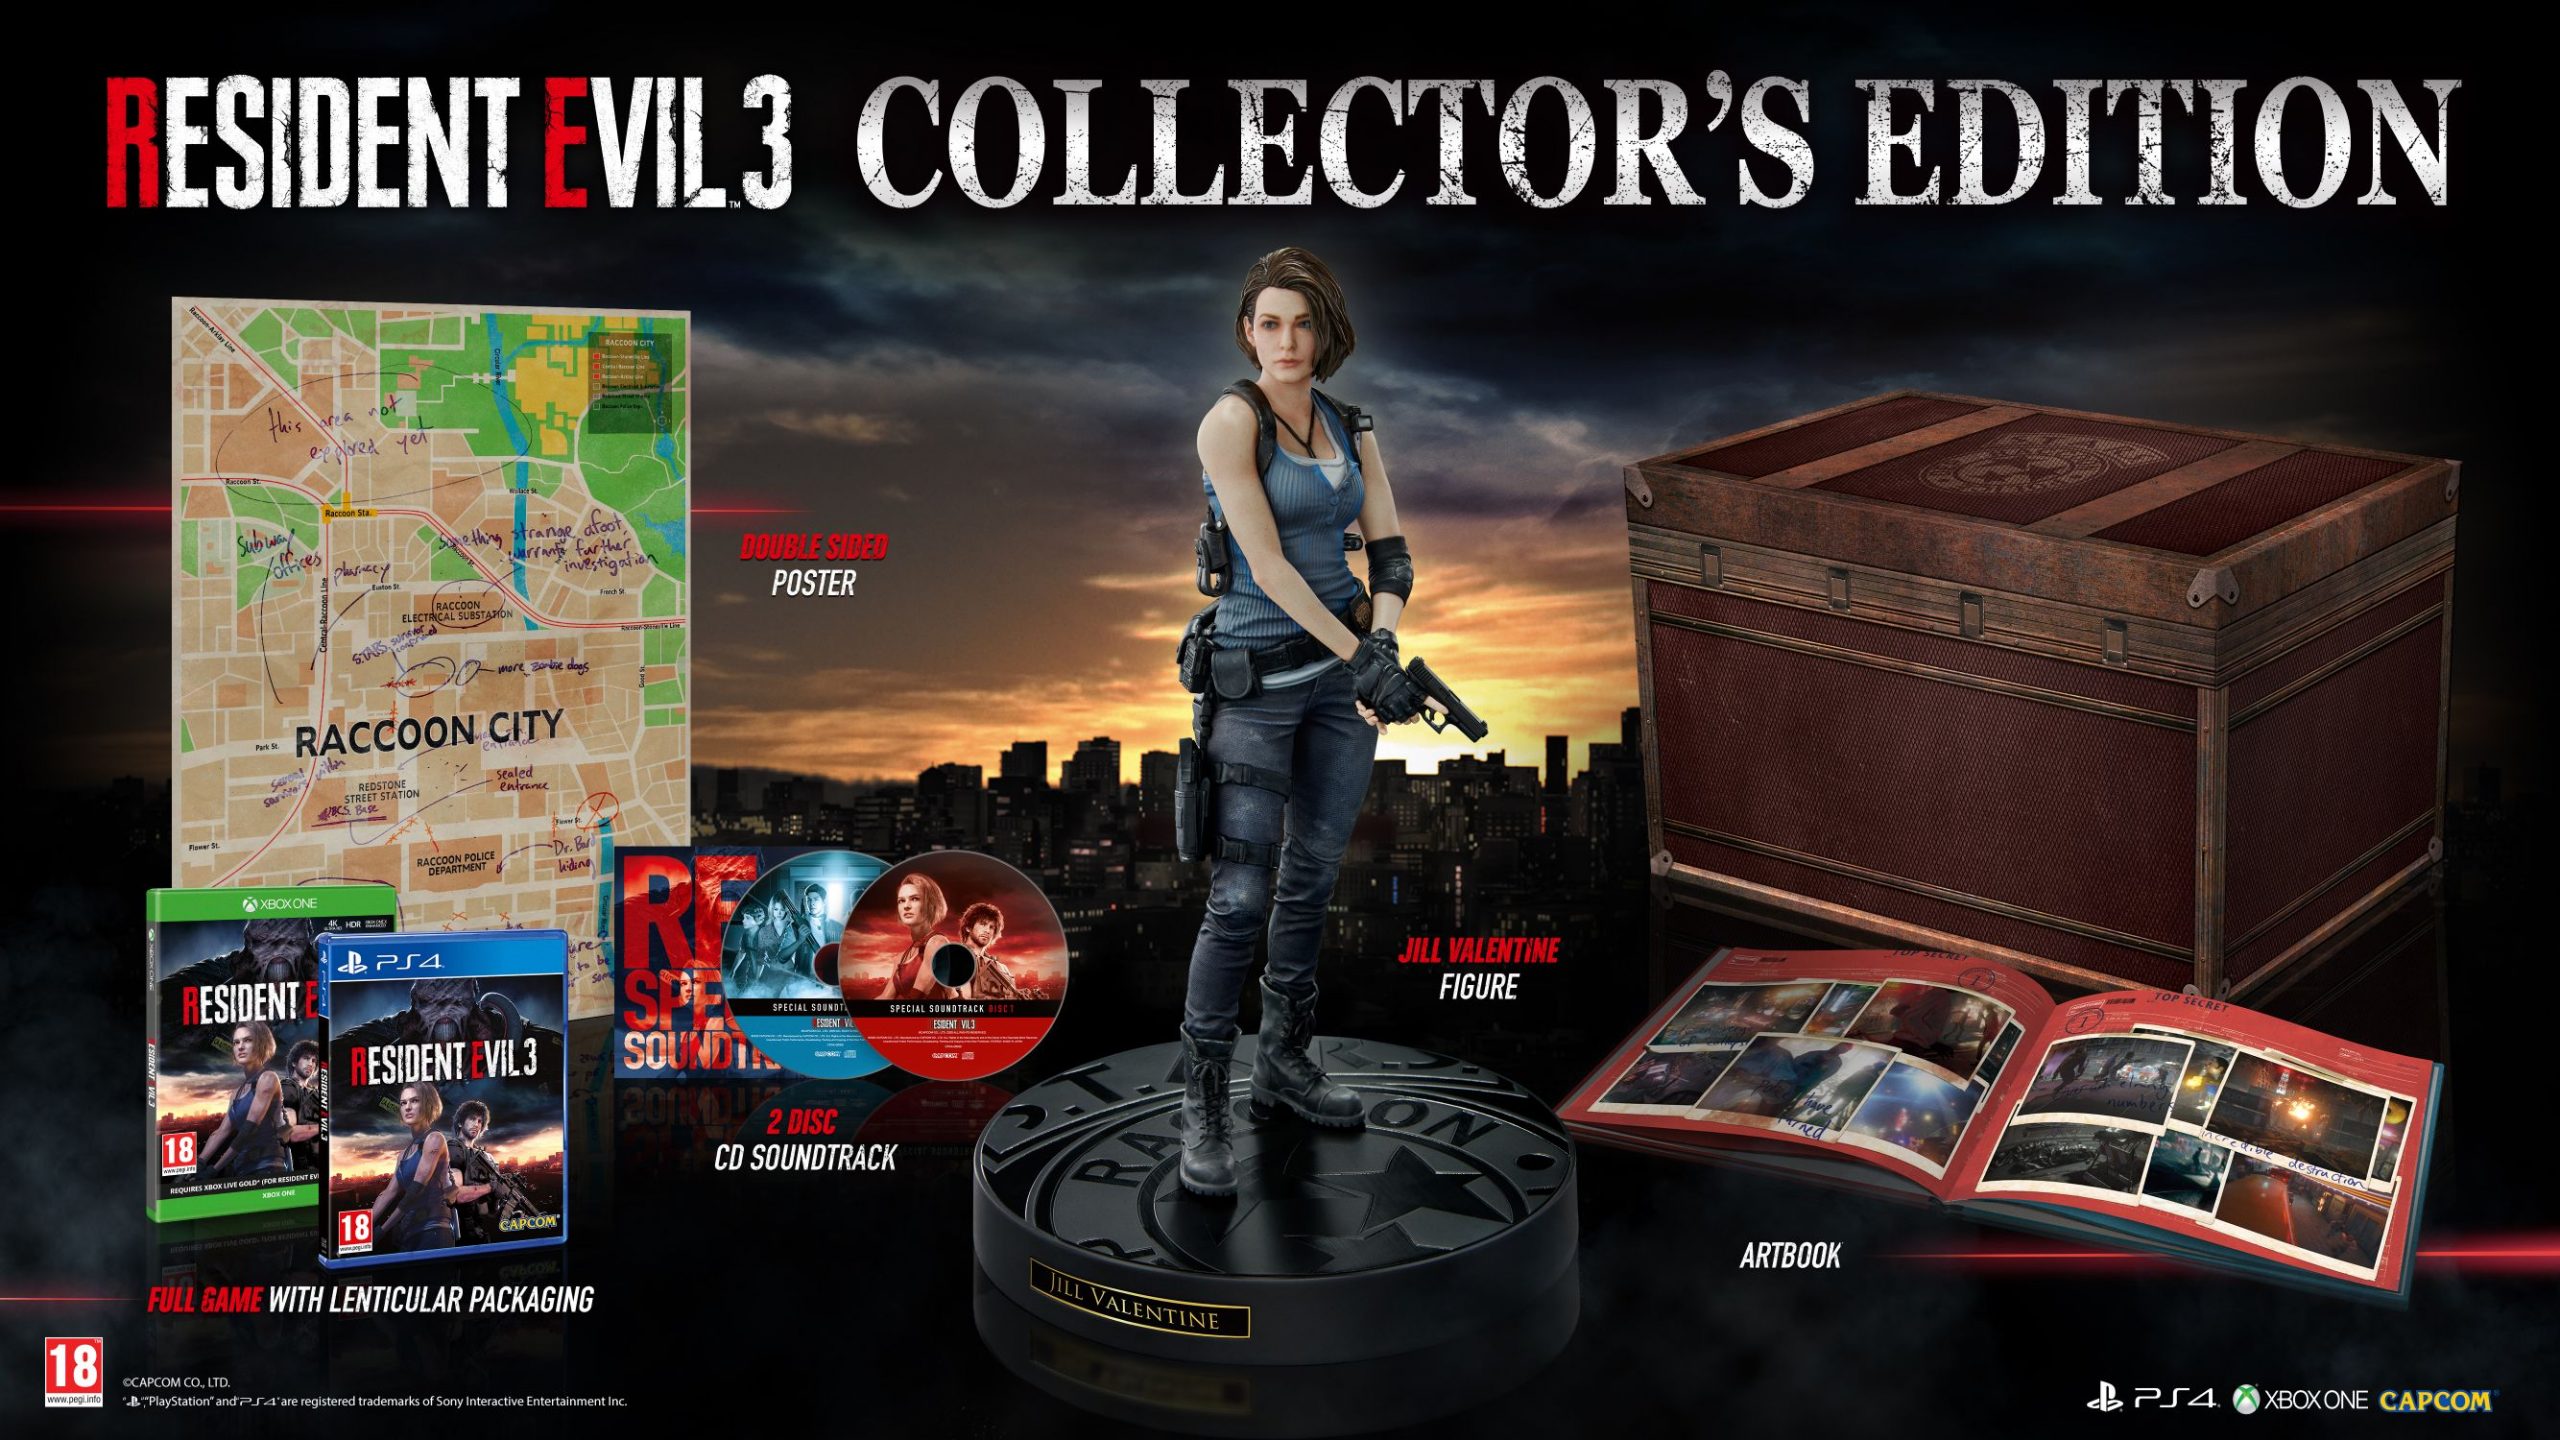 Resident Evil 3 Collector’s Edition announced for Europe